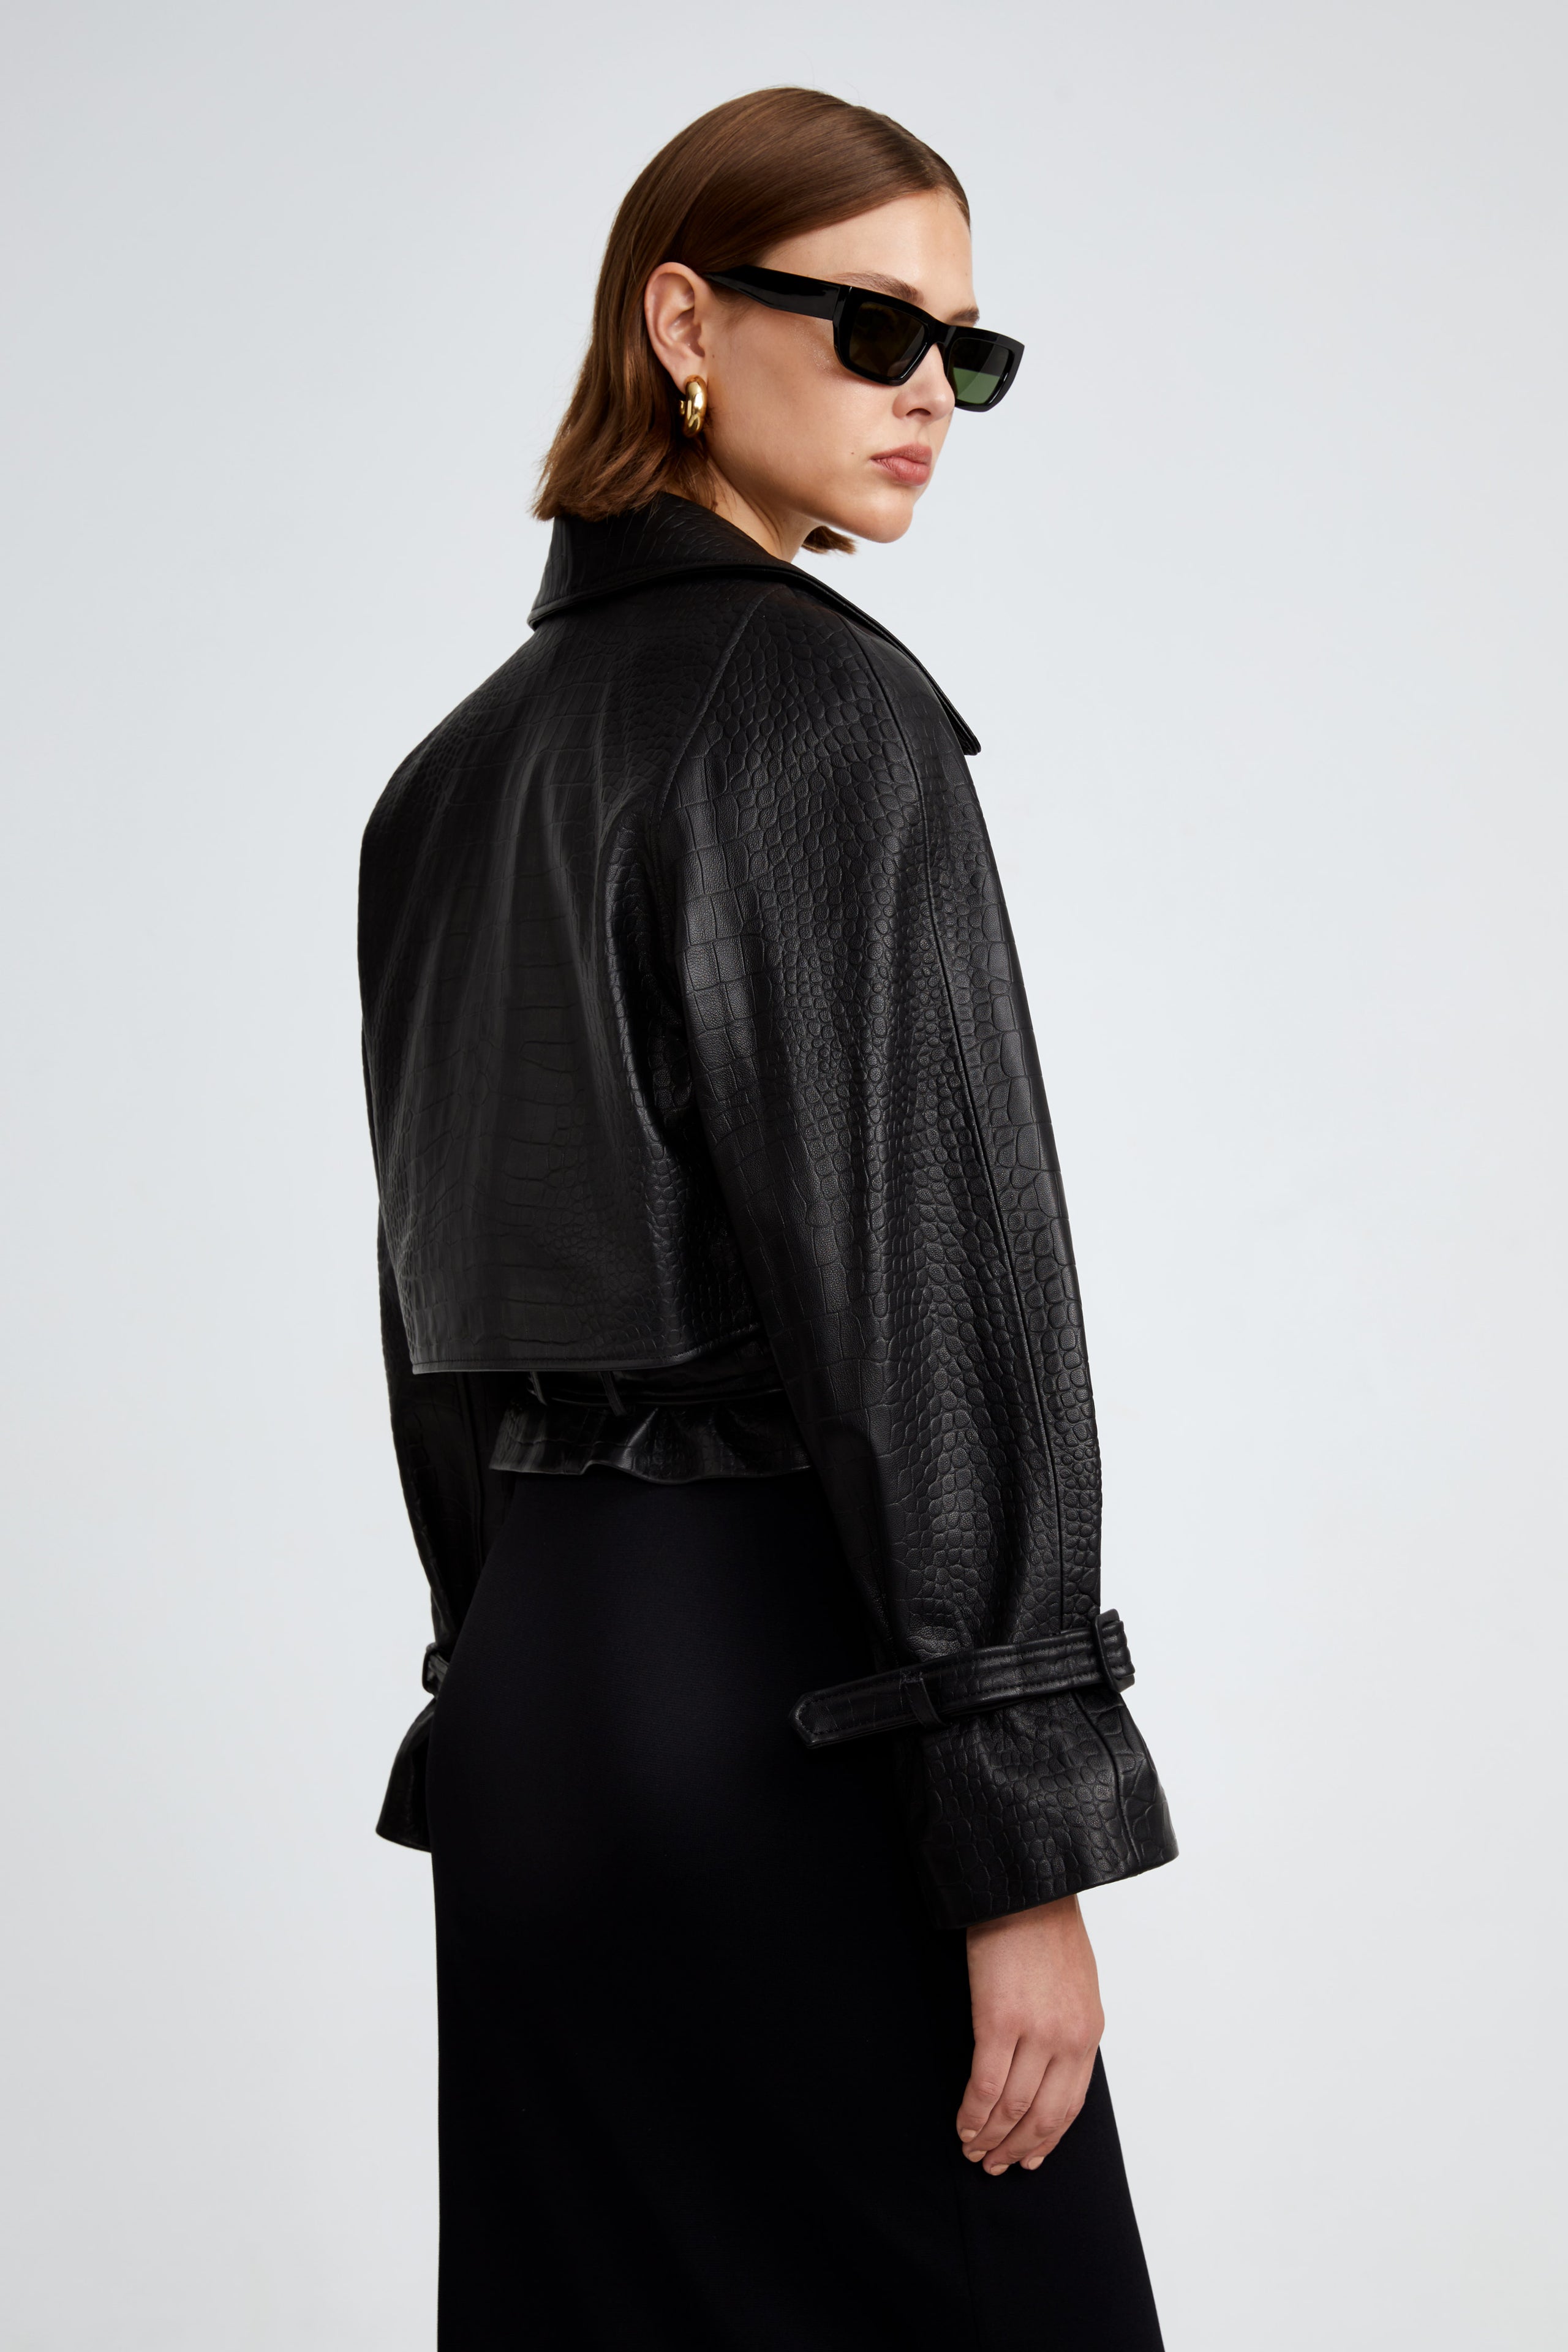 Model is wearing the Hatti Croco Black Cropped Leather Jacket Back